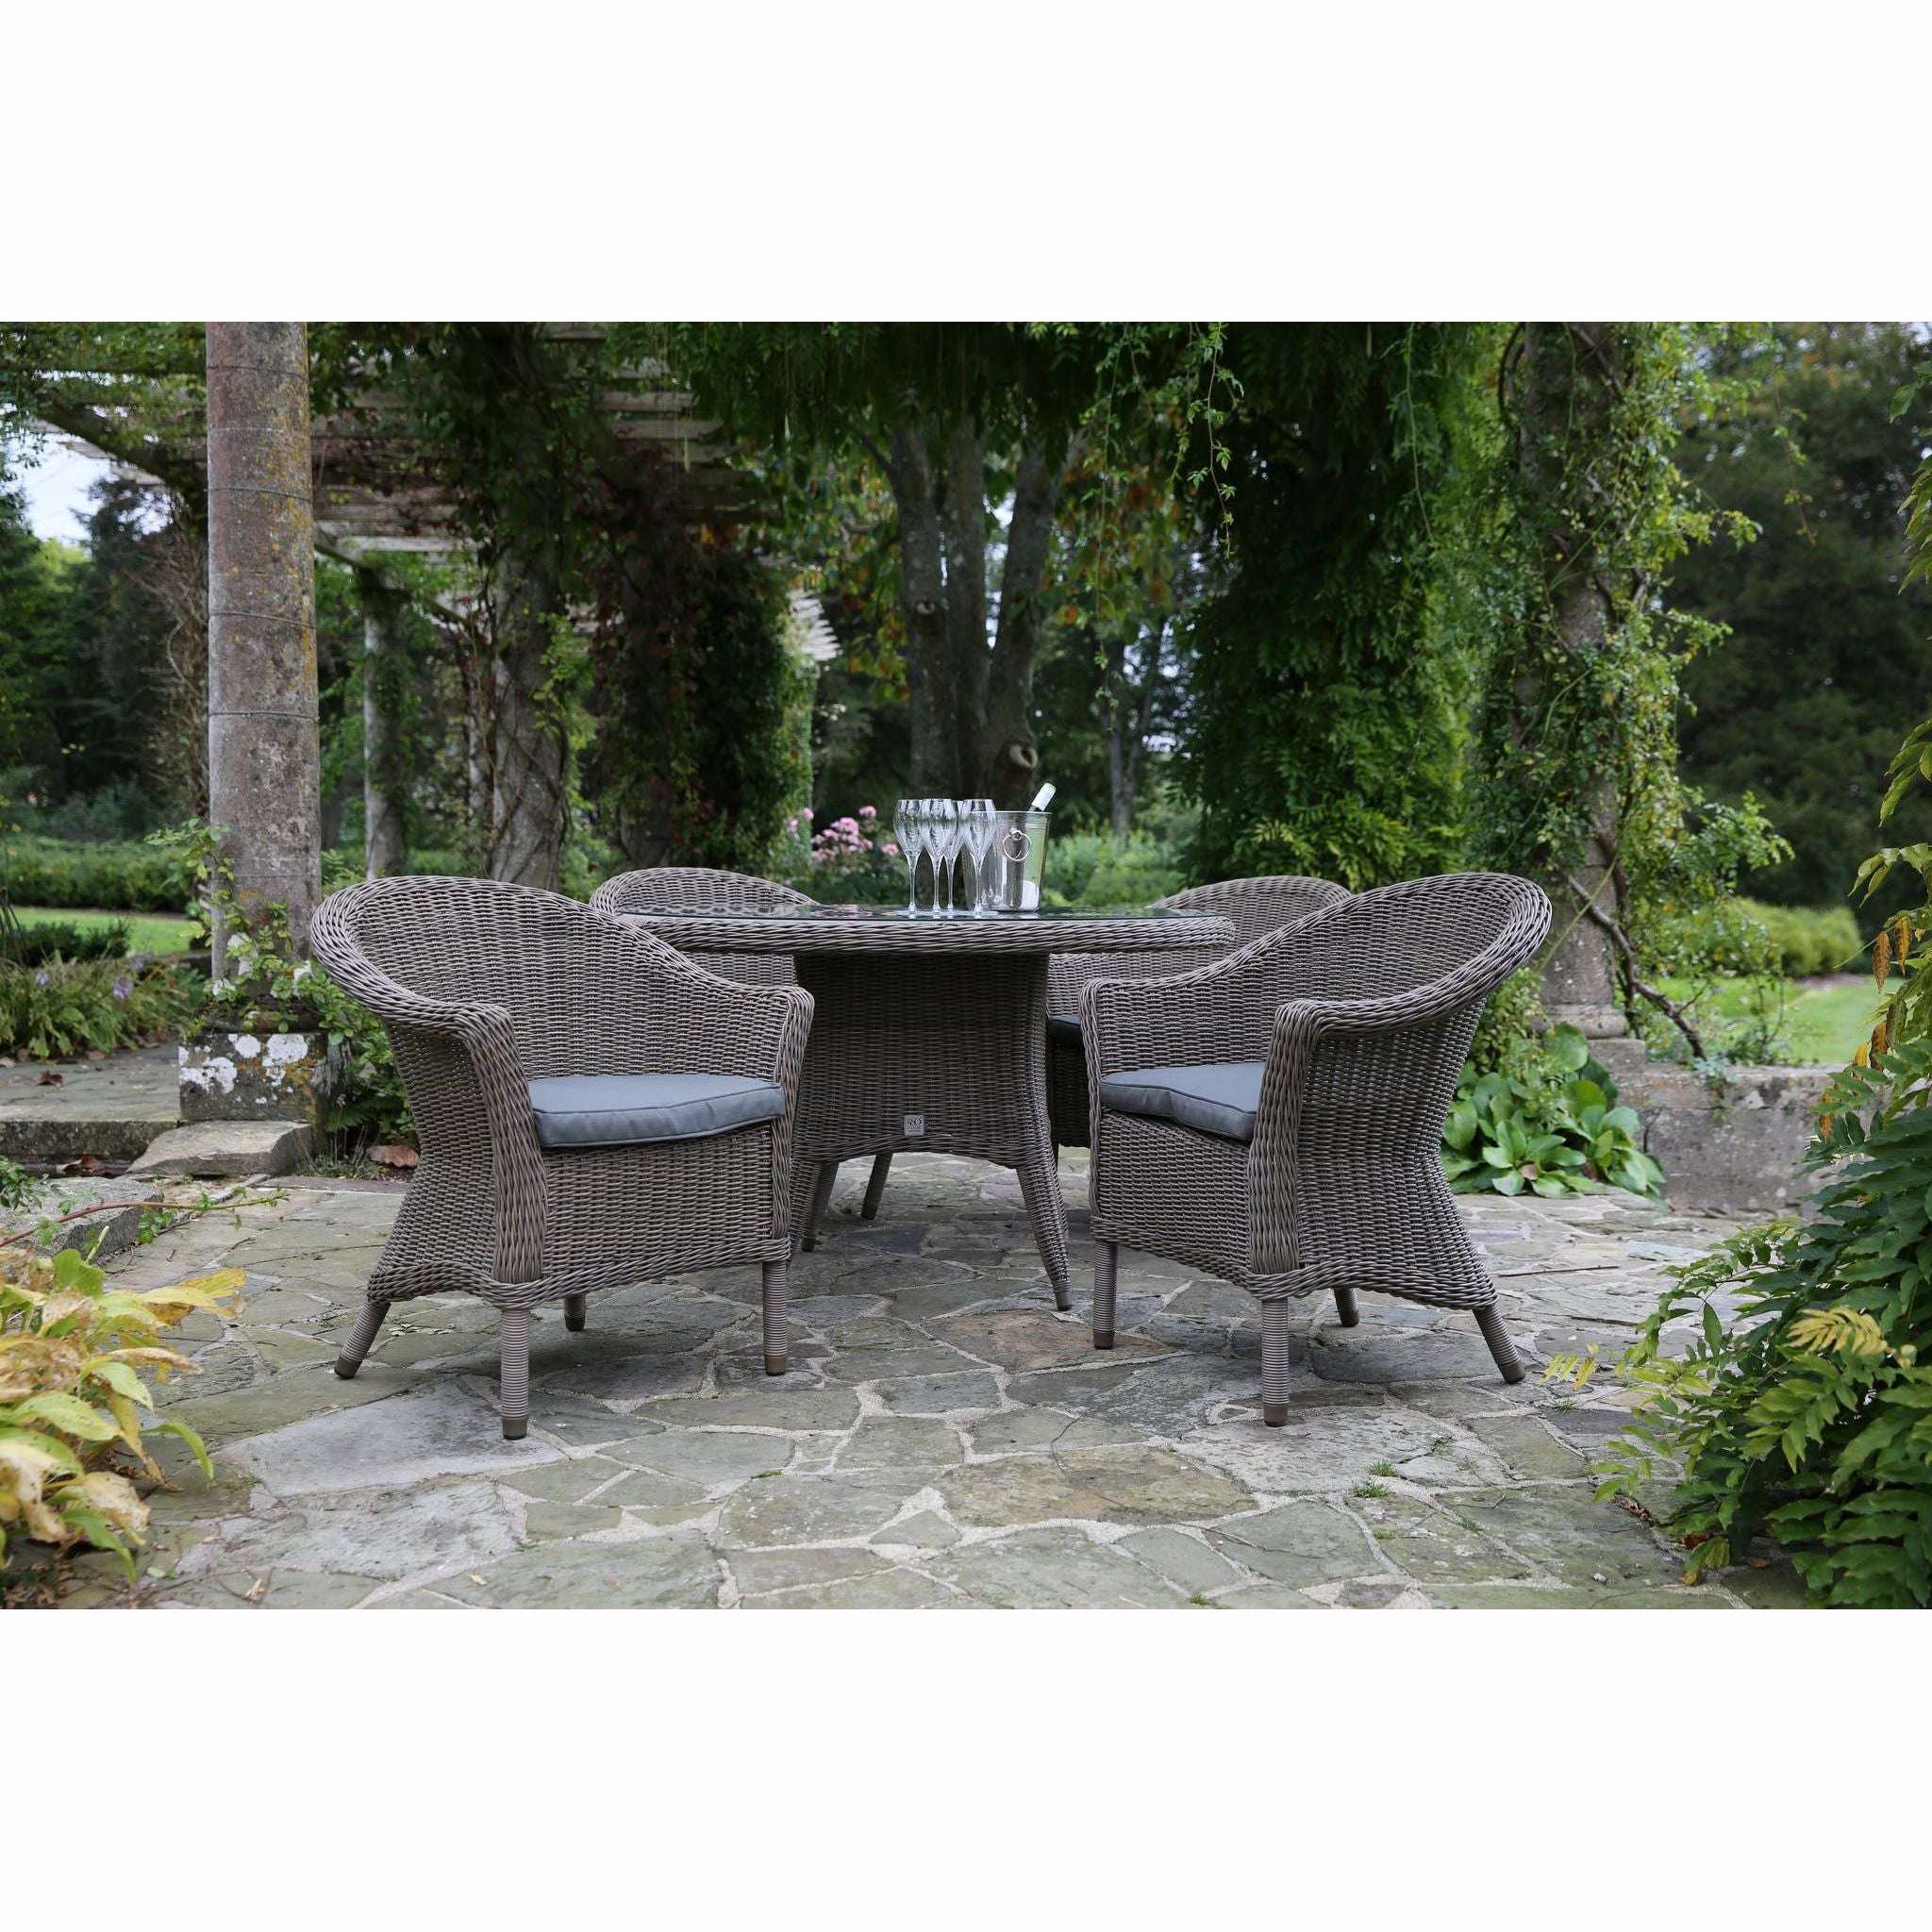 Exceptional Garden:4 Seasons Outdoor Chester 4 Seat Dining set with Victoria 130cm Table